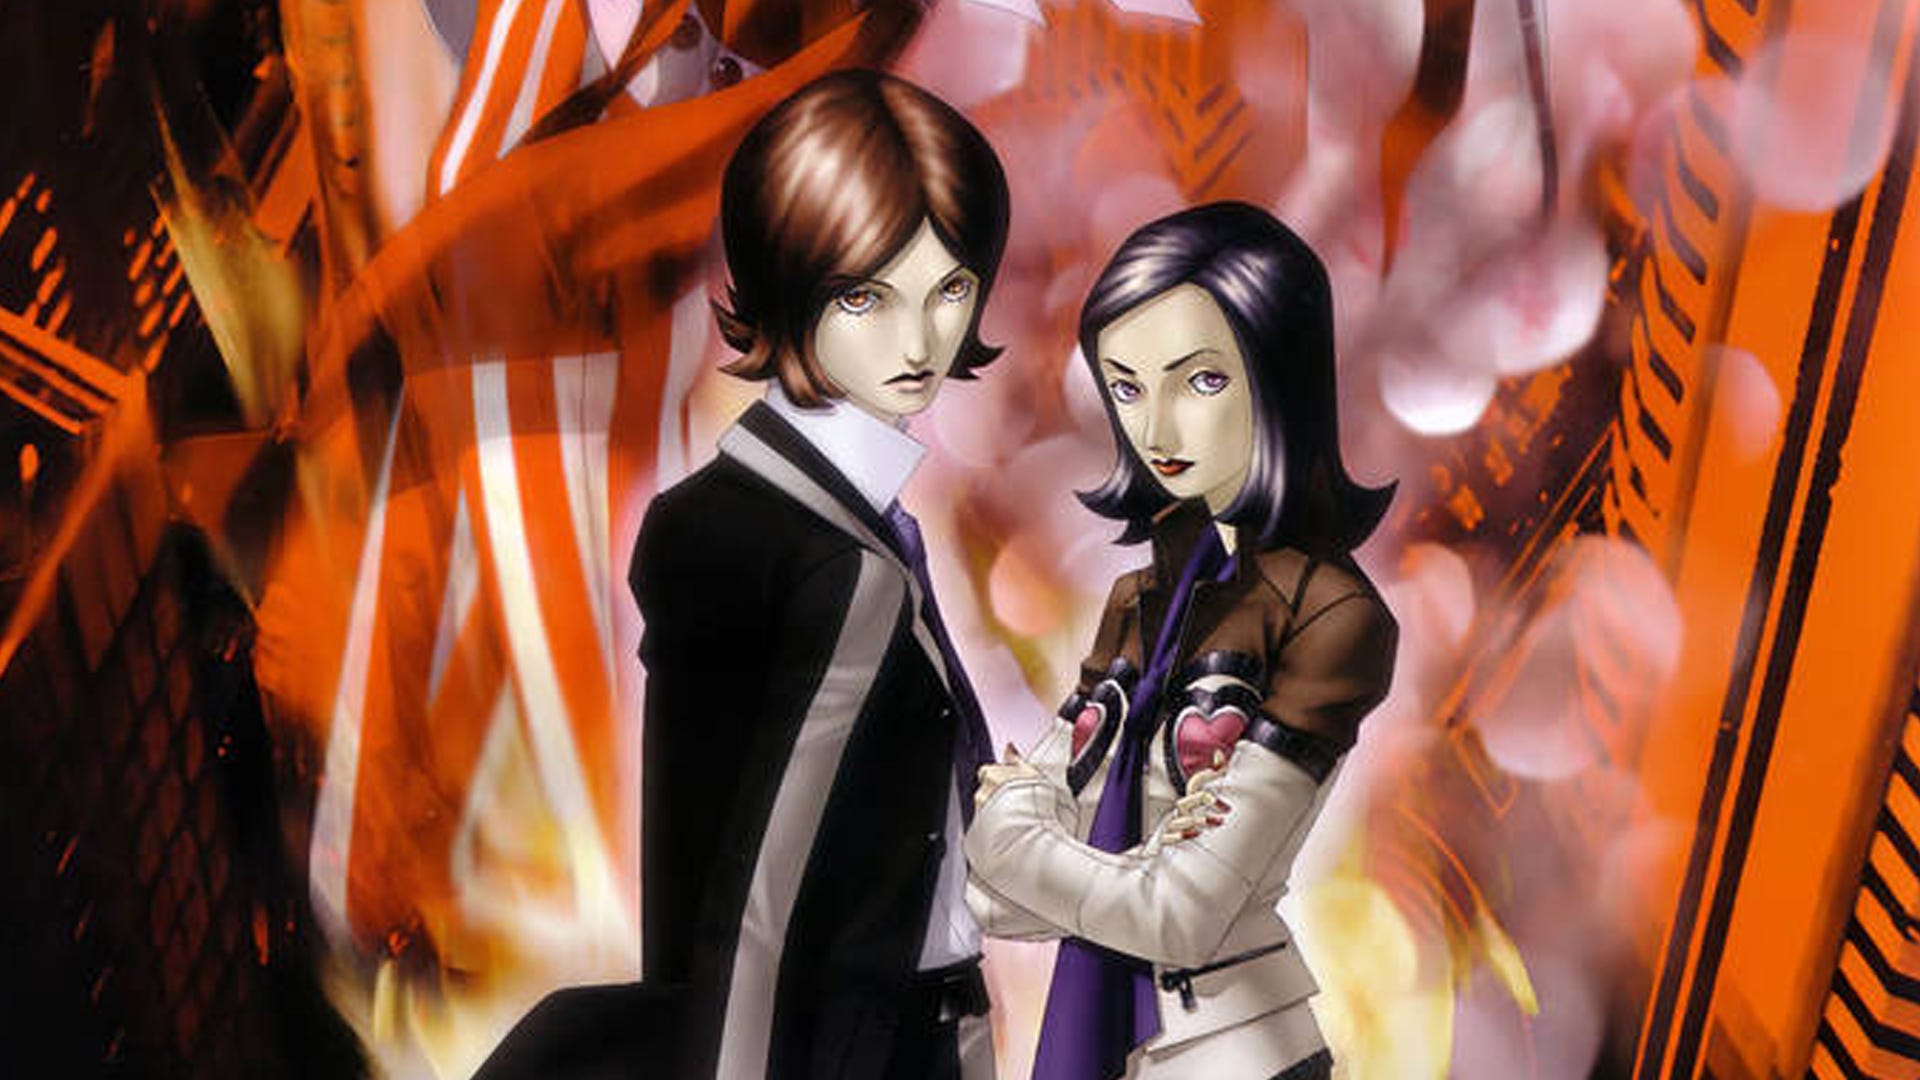 Persona 1 and 2 are getting remakes, or at least an “updated form,” a prominent Atlus leaker has claimed